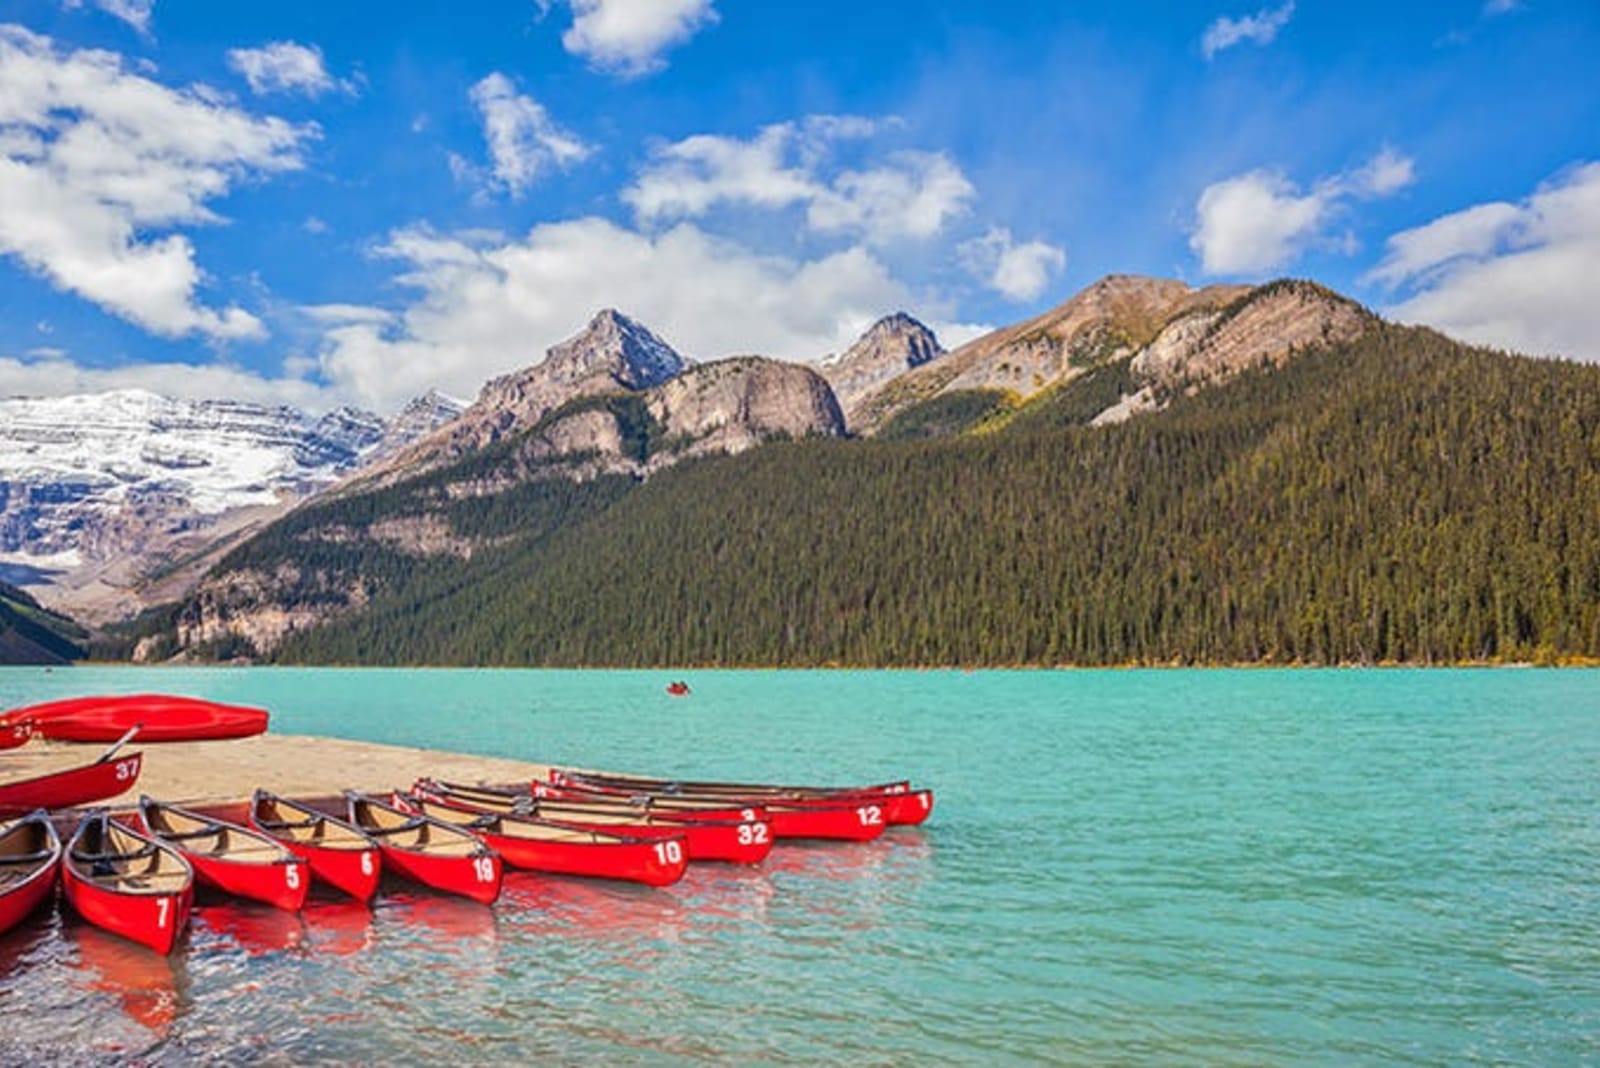 rs-canoes-lake-louise-canada-shutterstock512581183.jpeg